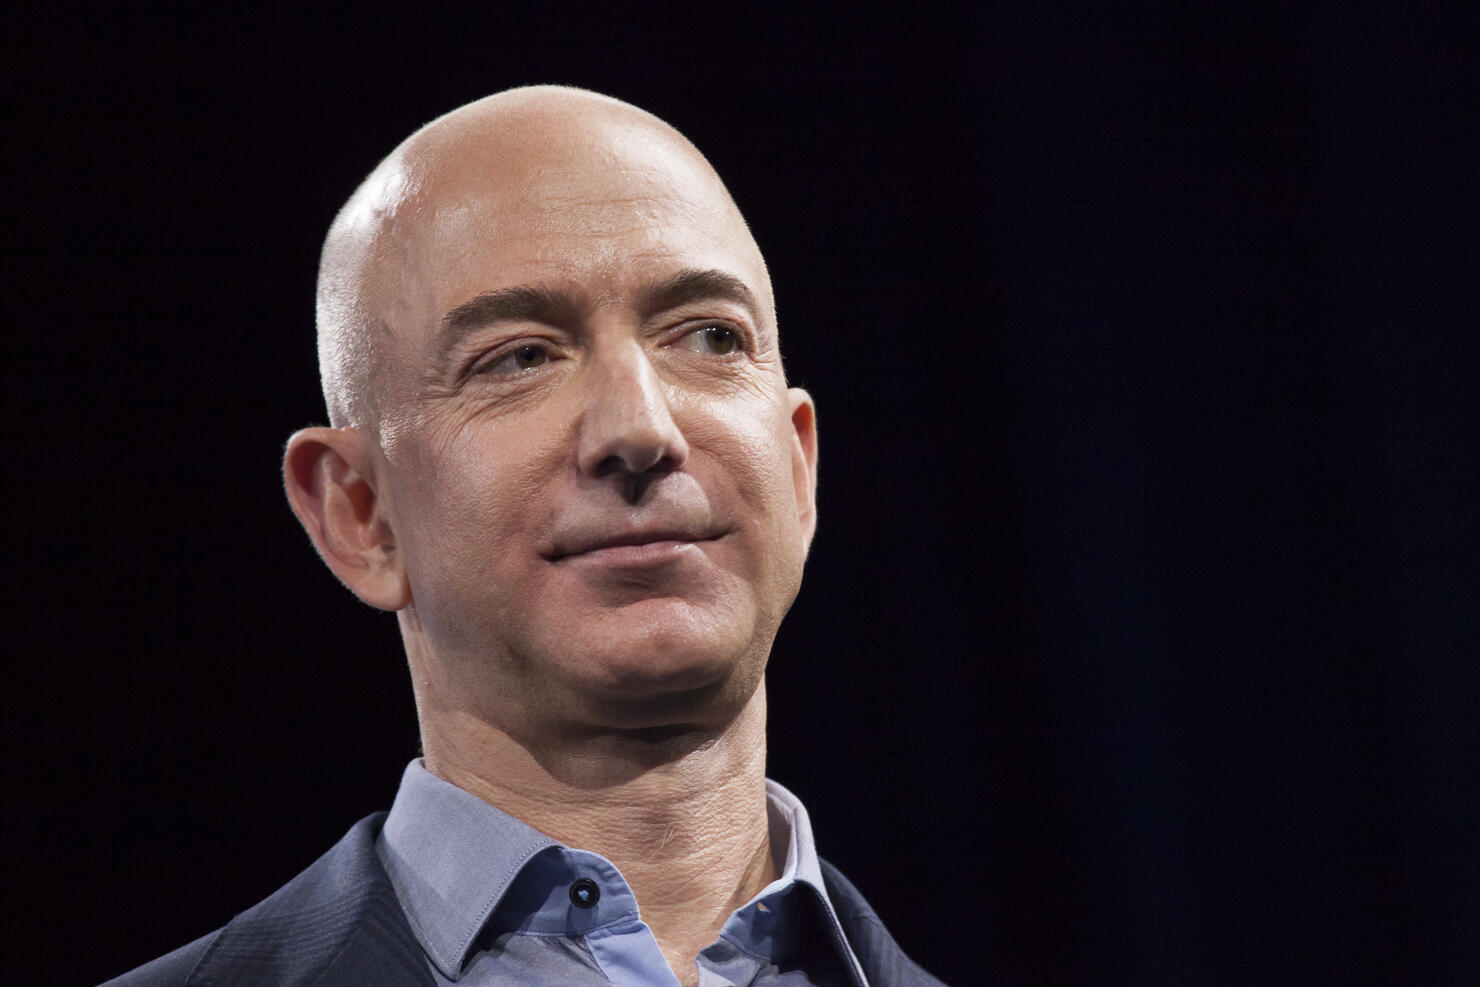 Jeff Bezos says he's become the target of a blackmail attempt by the publishers of National Enquirer